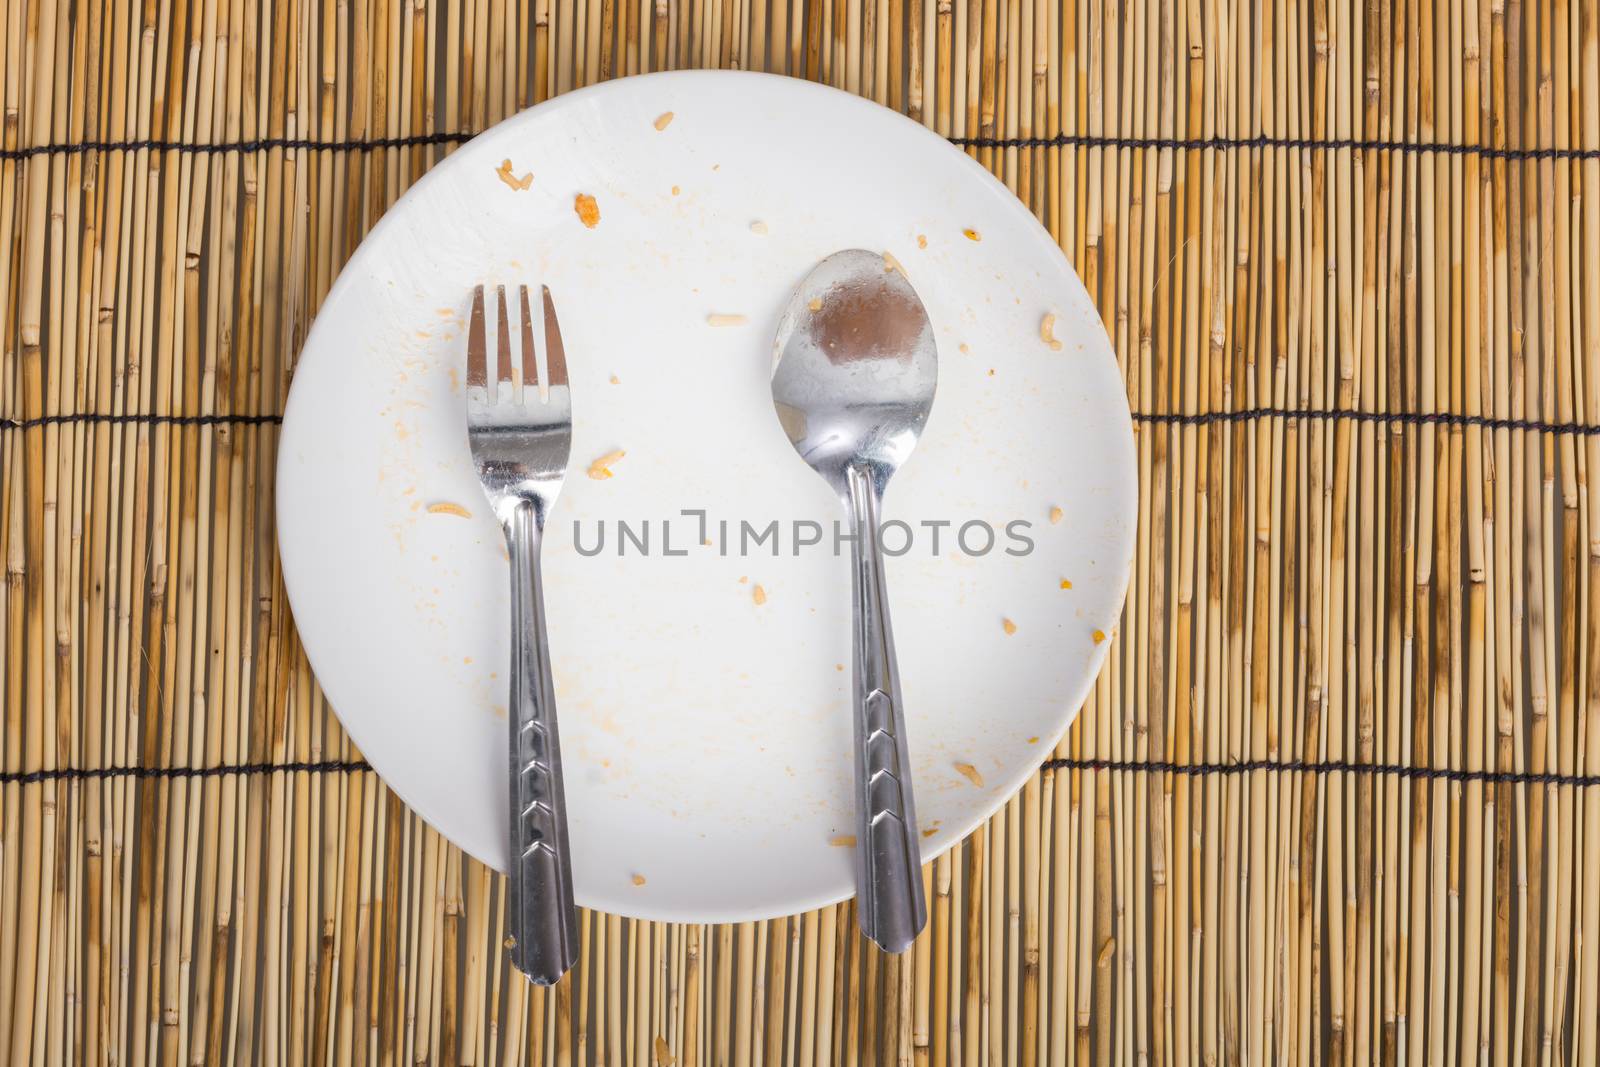 Empty Dirty bowl after food on table with wooden background